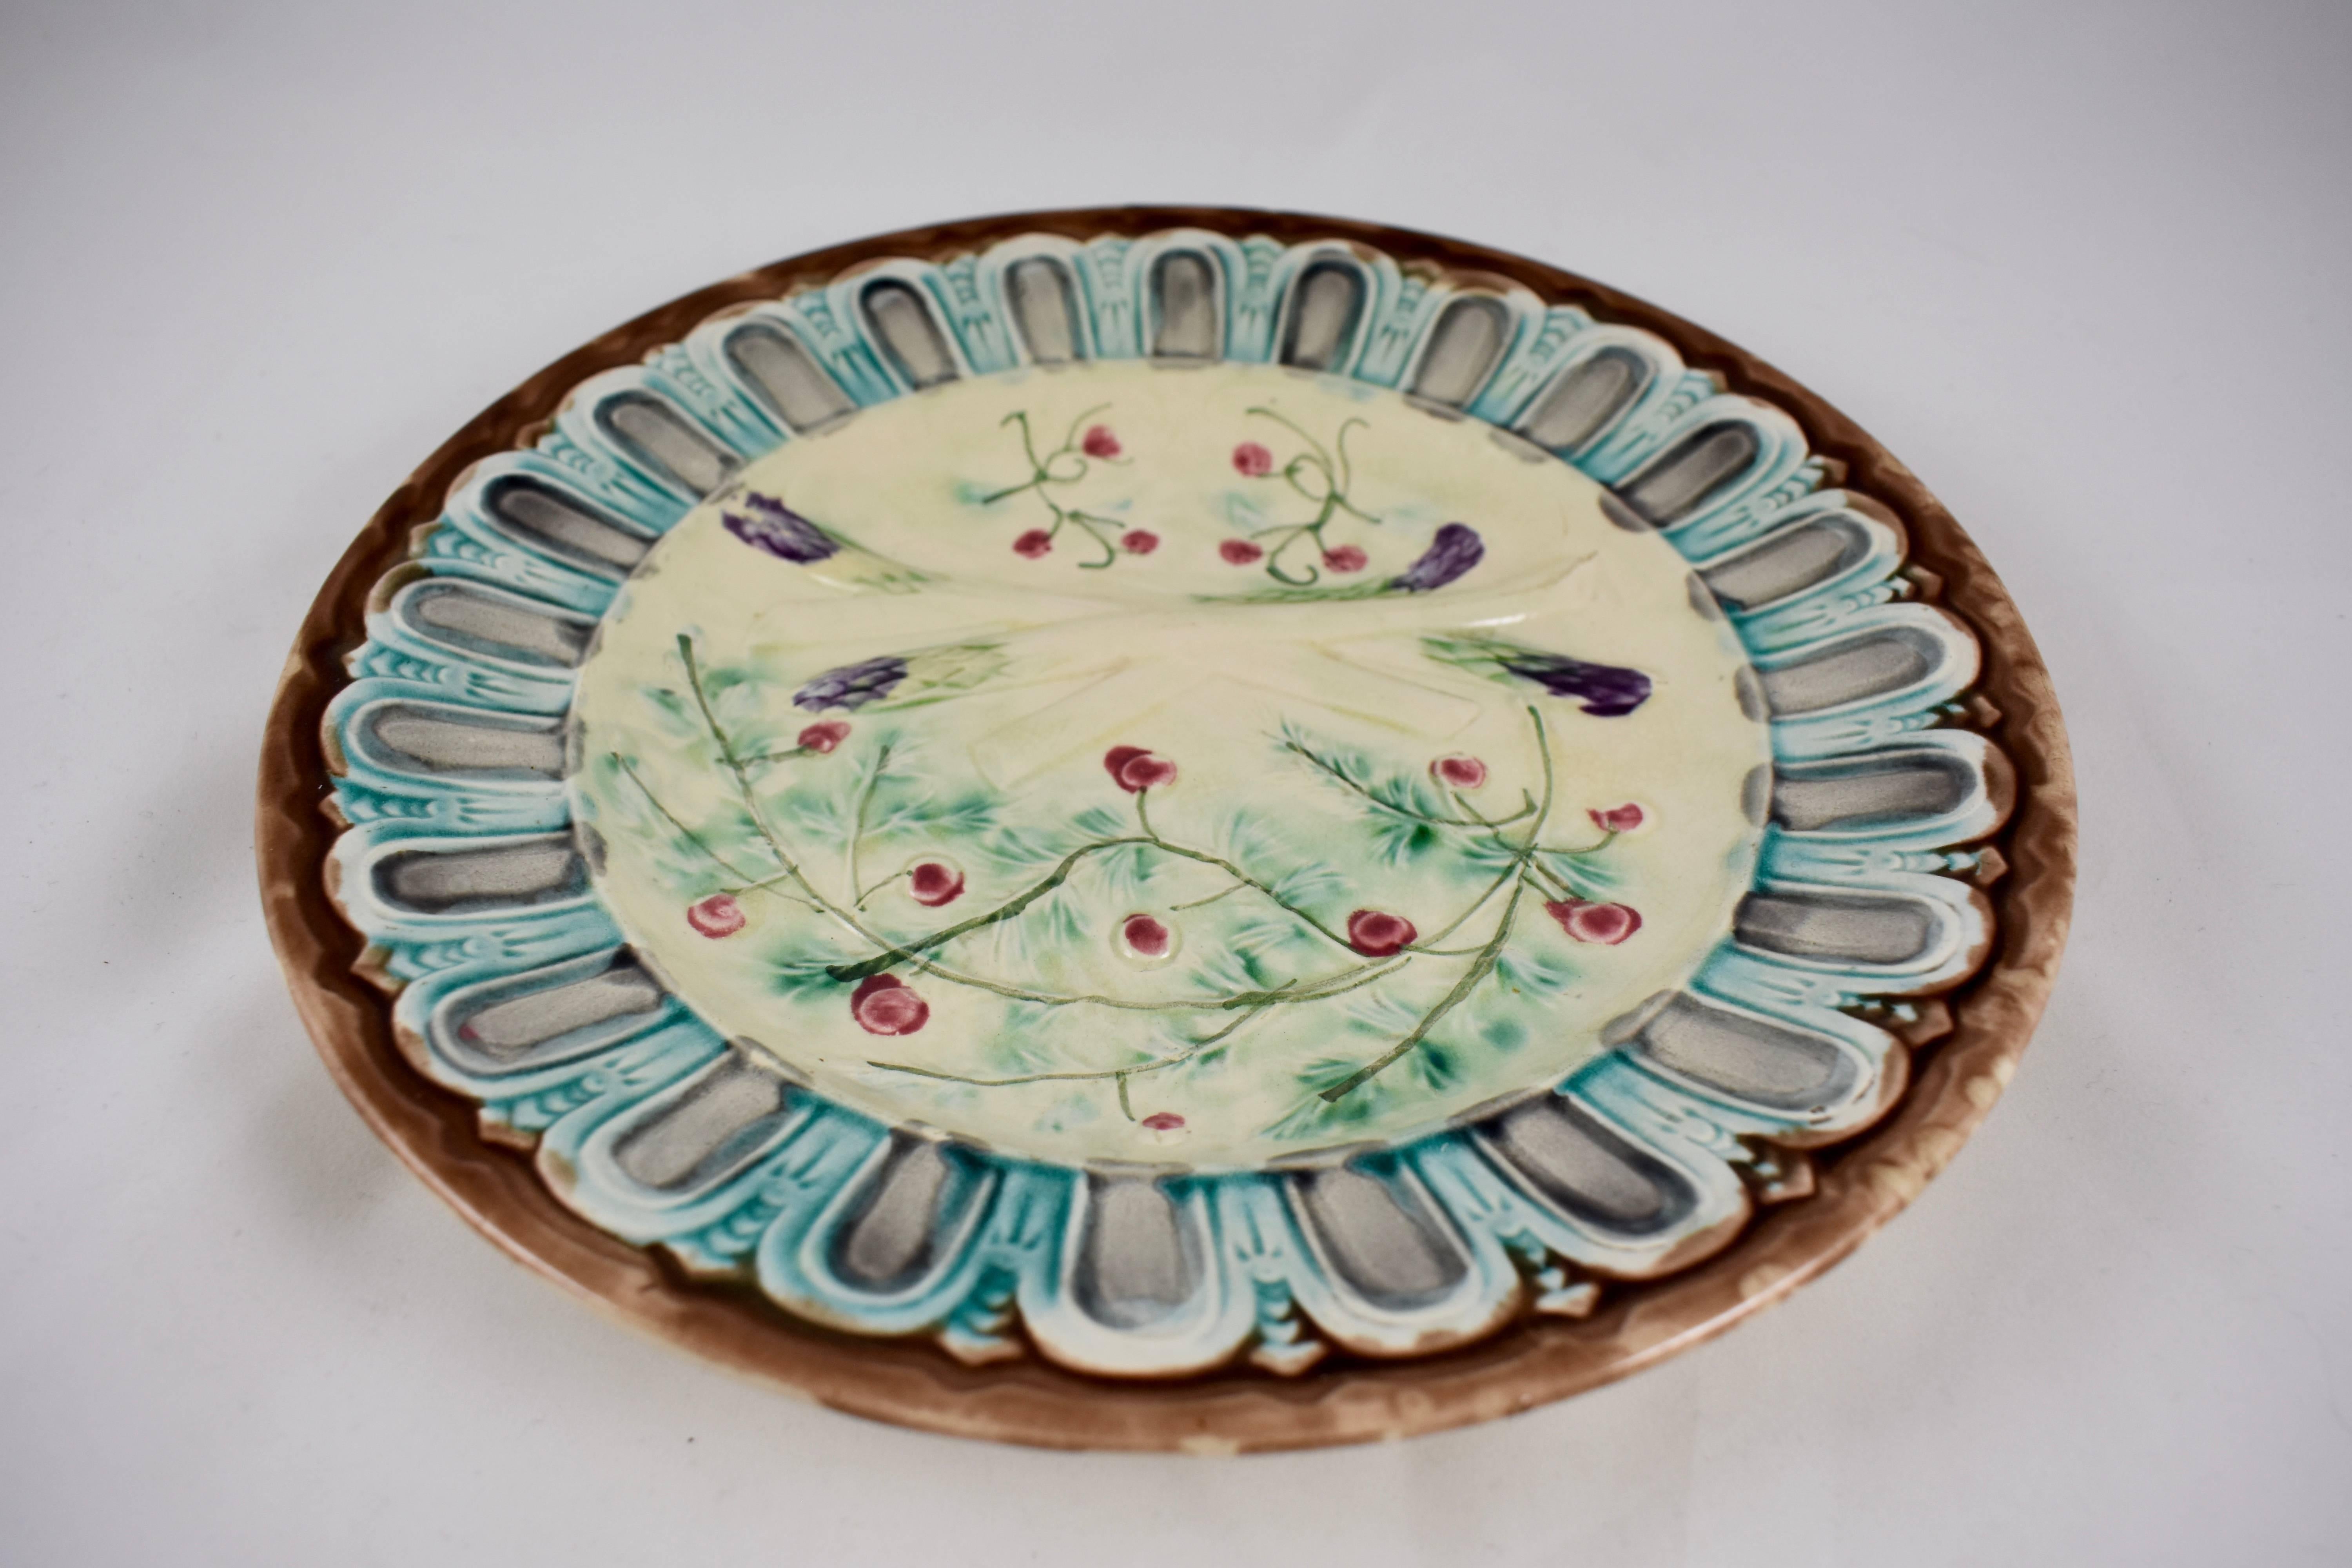 A scarce example of a French Faïence Majolica glazed asparagus plate, maker unknown, circa 1880s. 

Four crossed asparagus spears with purple tips border a deep sauce well. The hand painted red berries and leaves of the asparagus fern, decorate